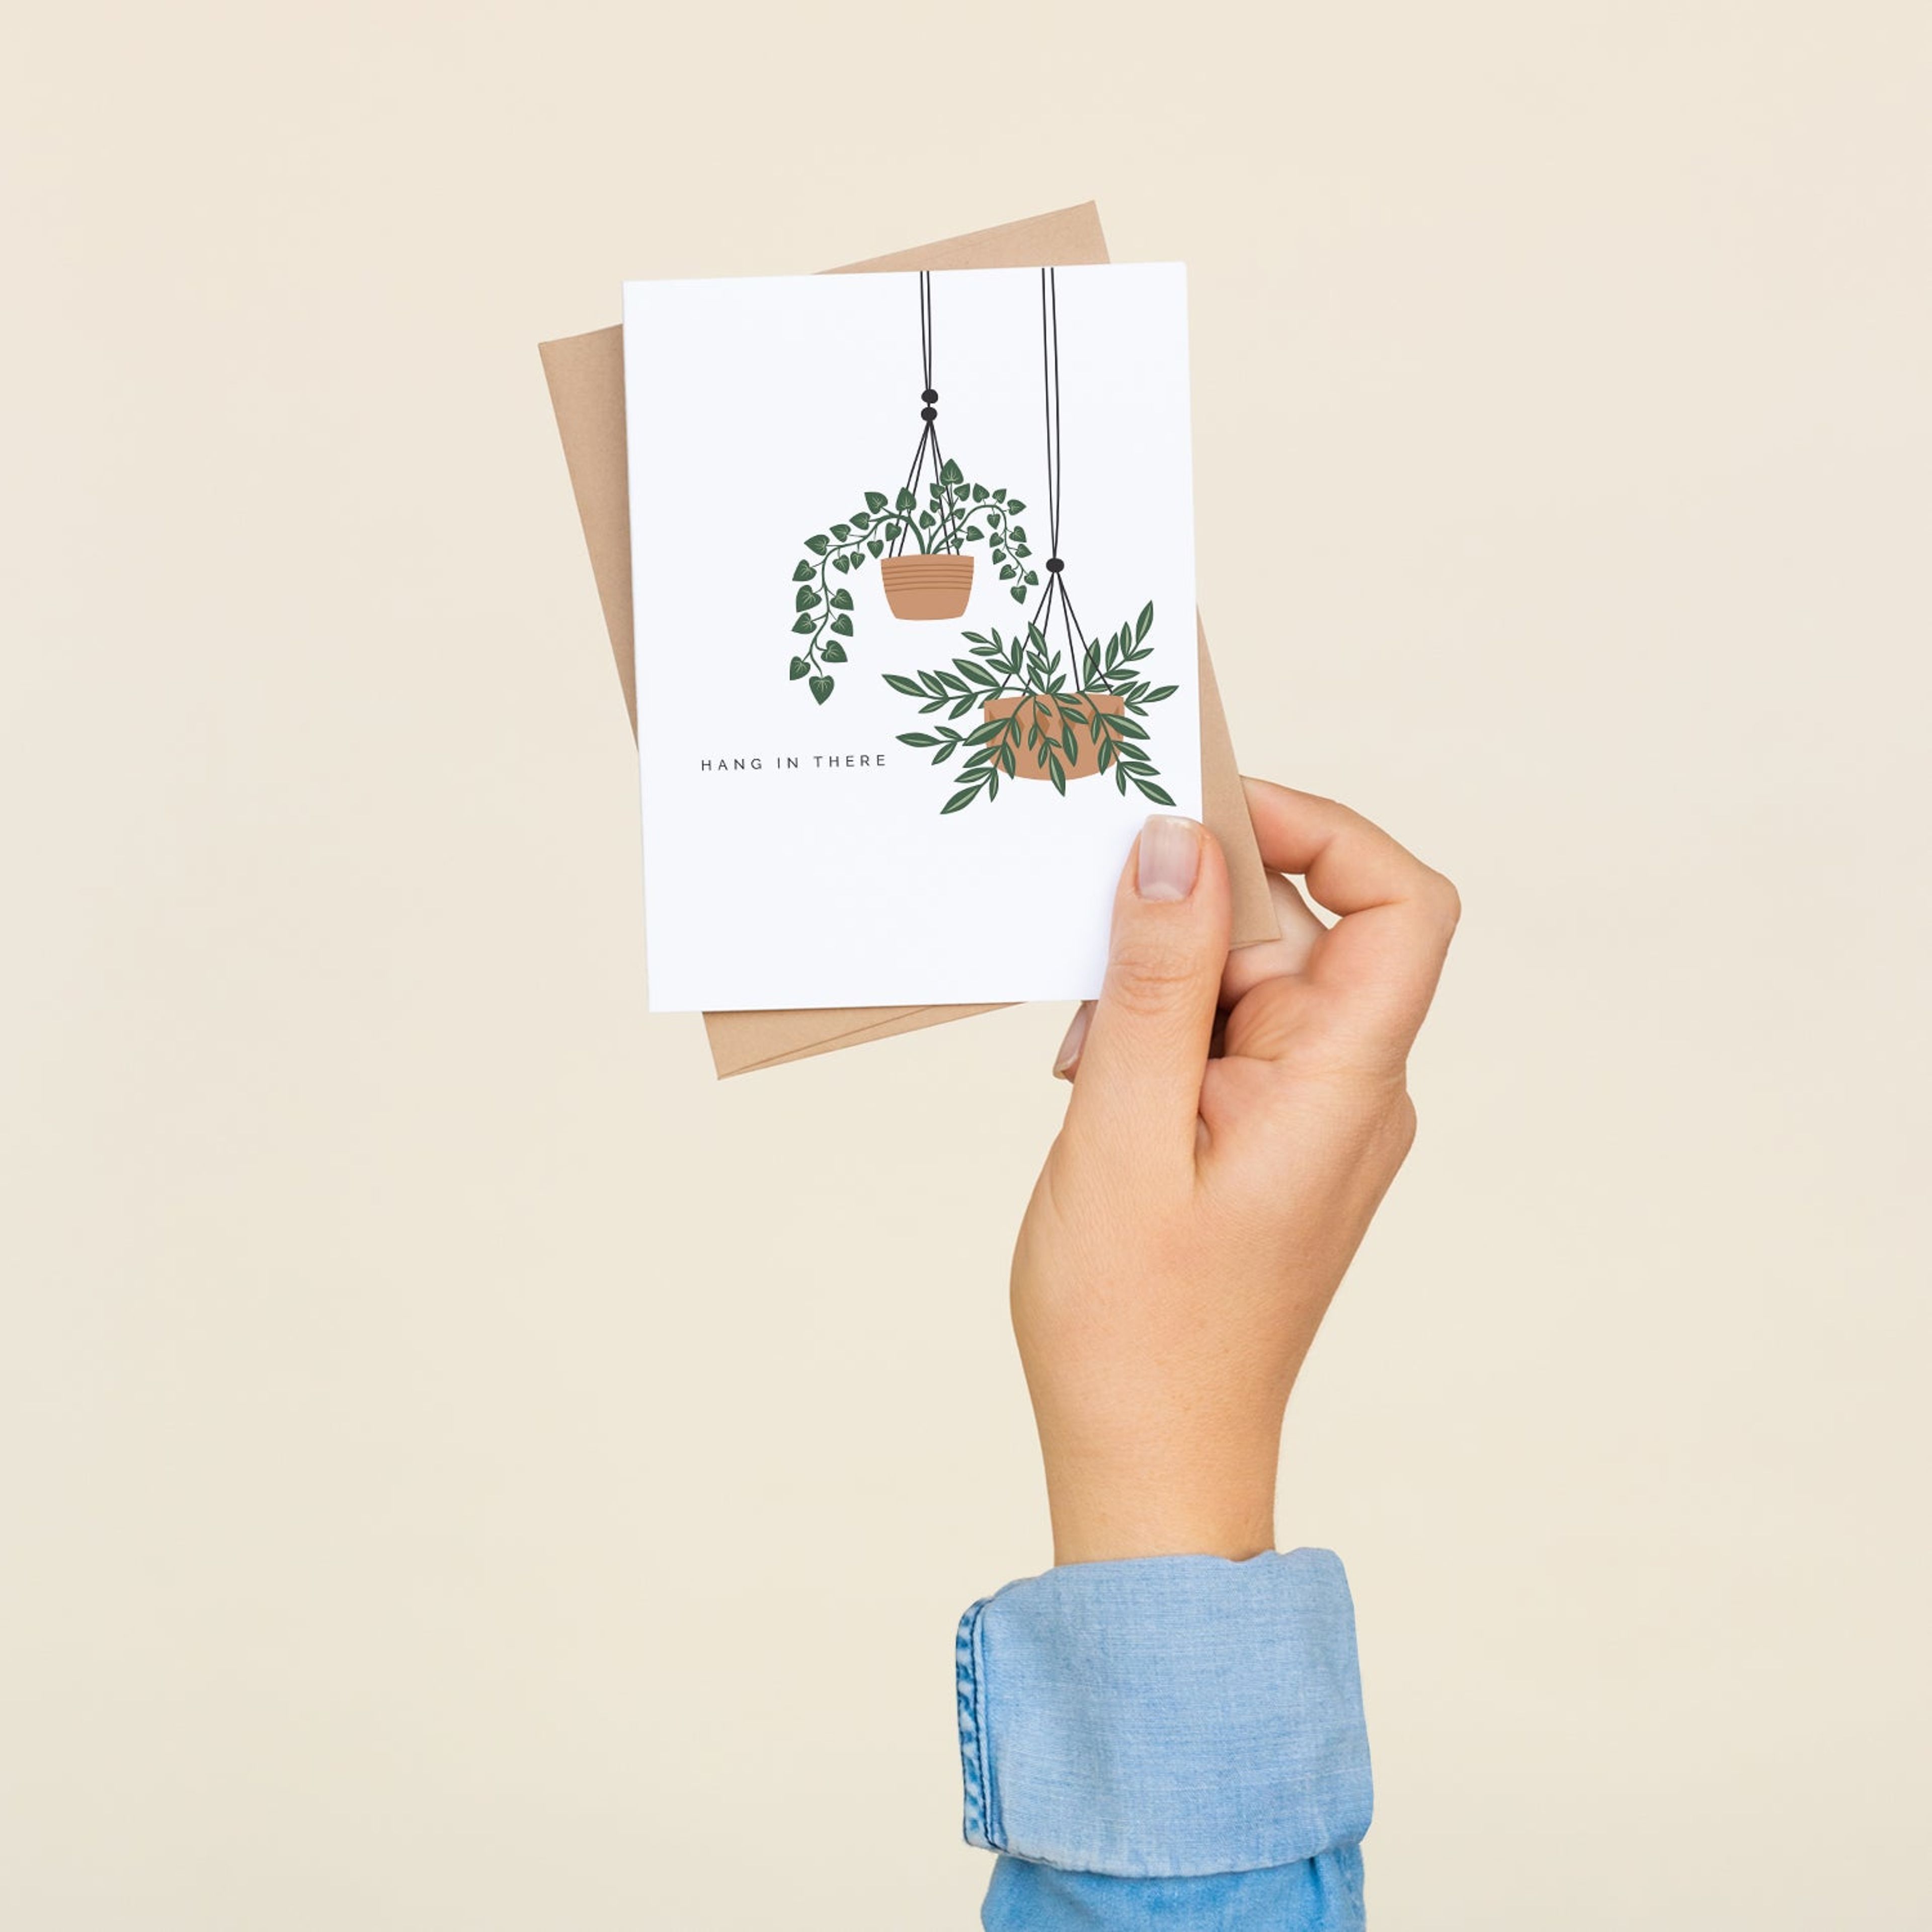 "Hang in There" Houseplants Greeting Card